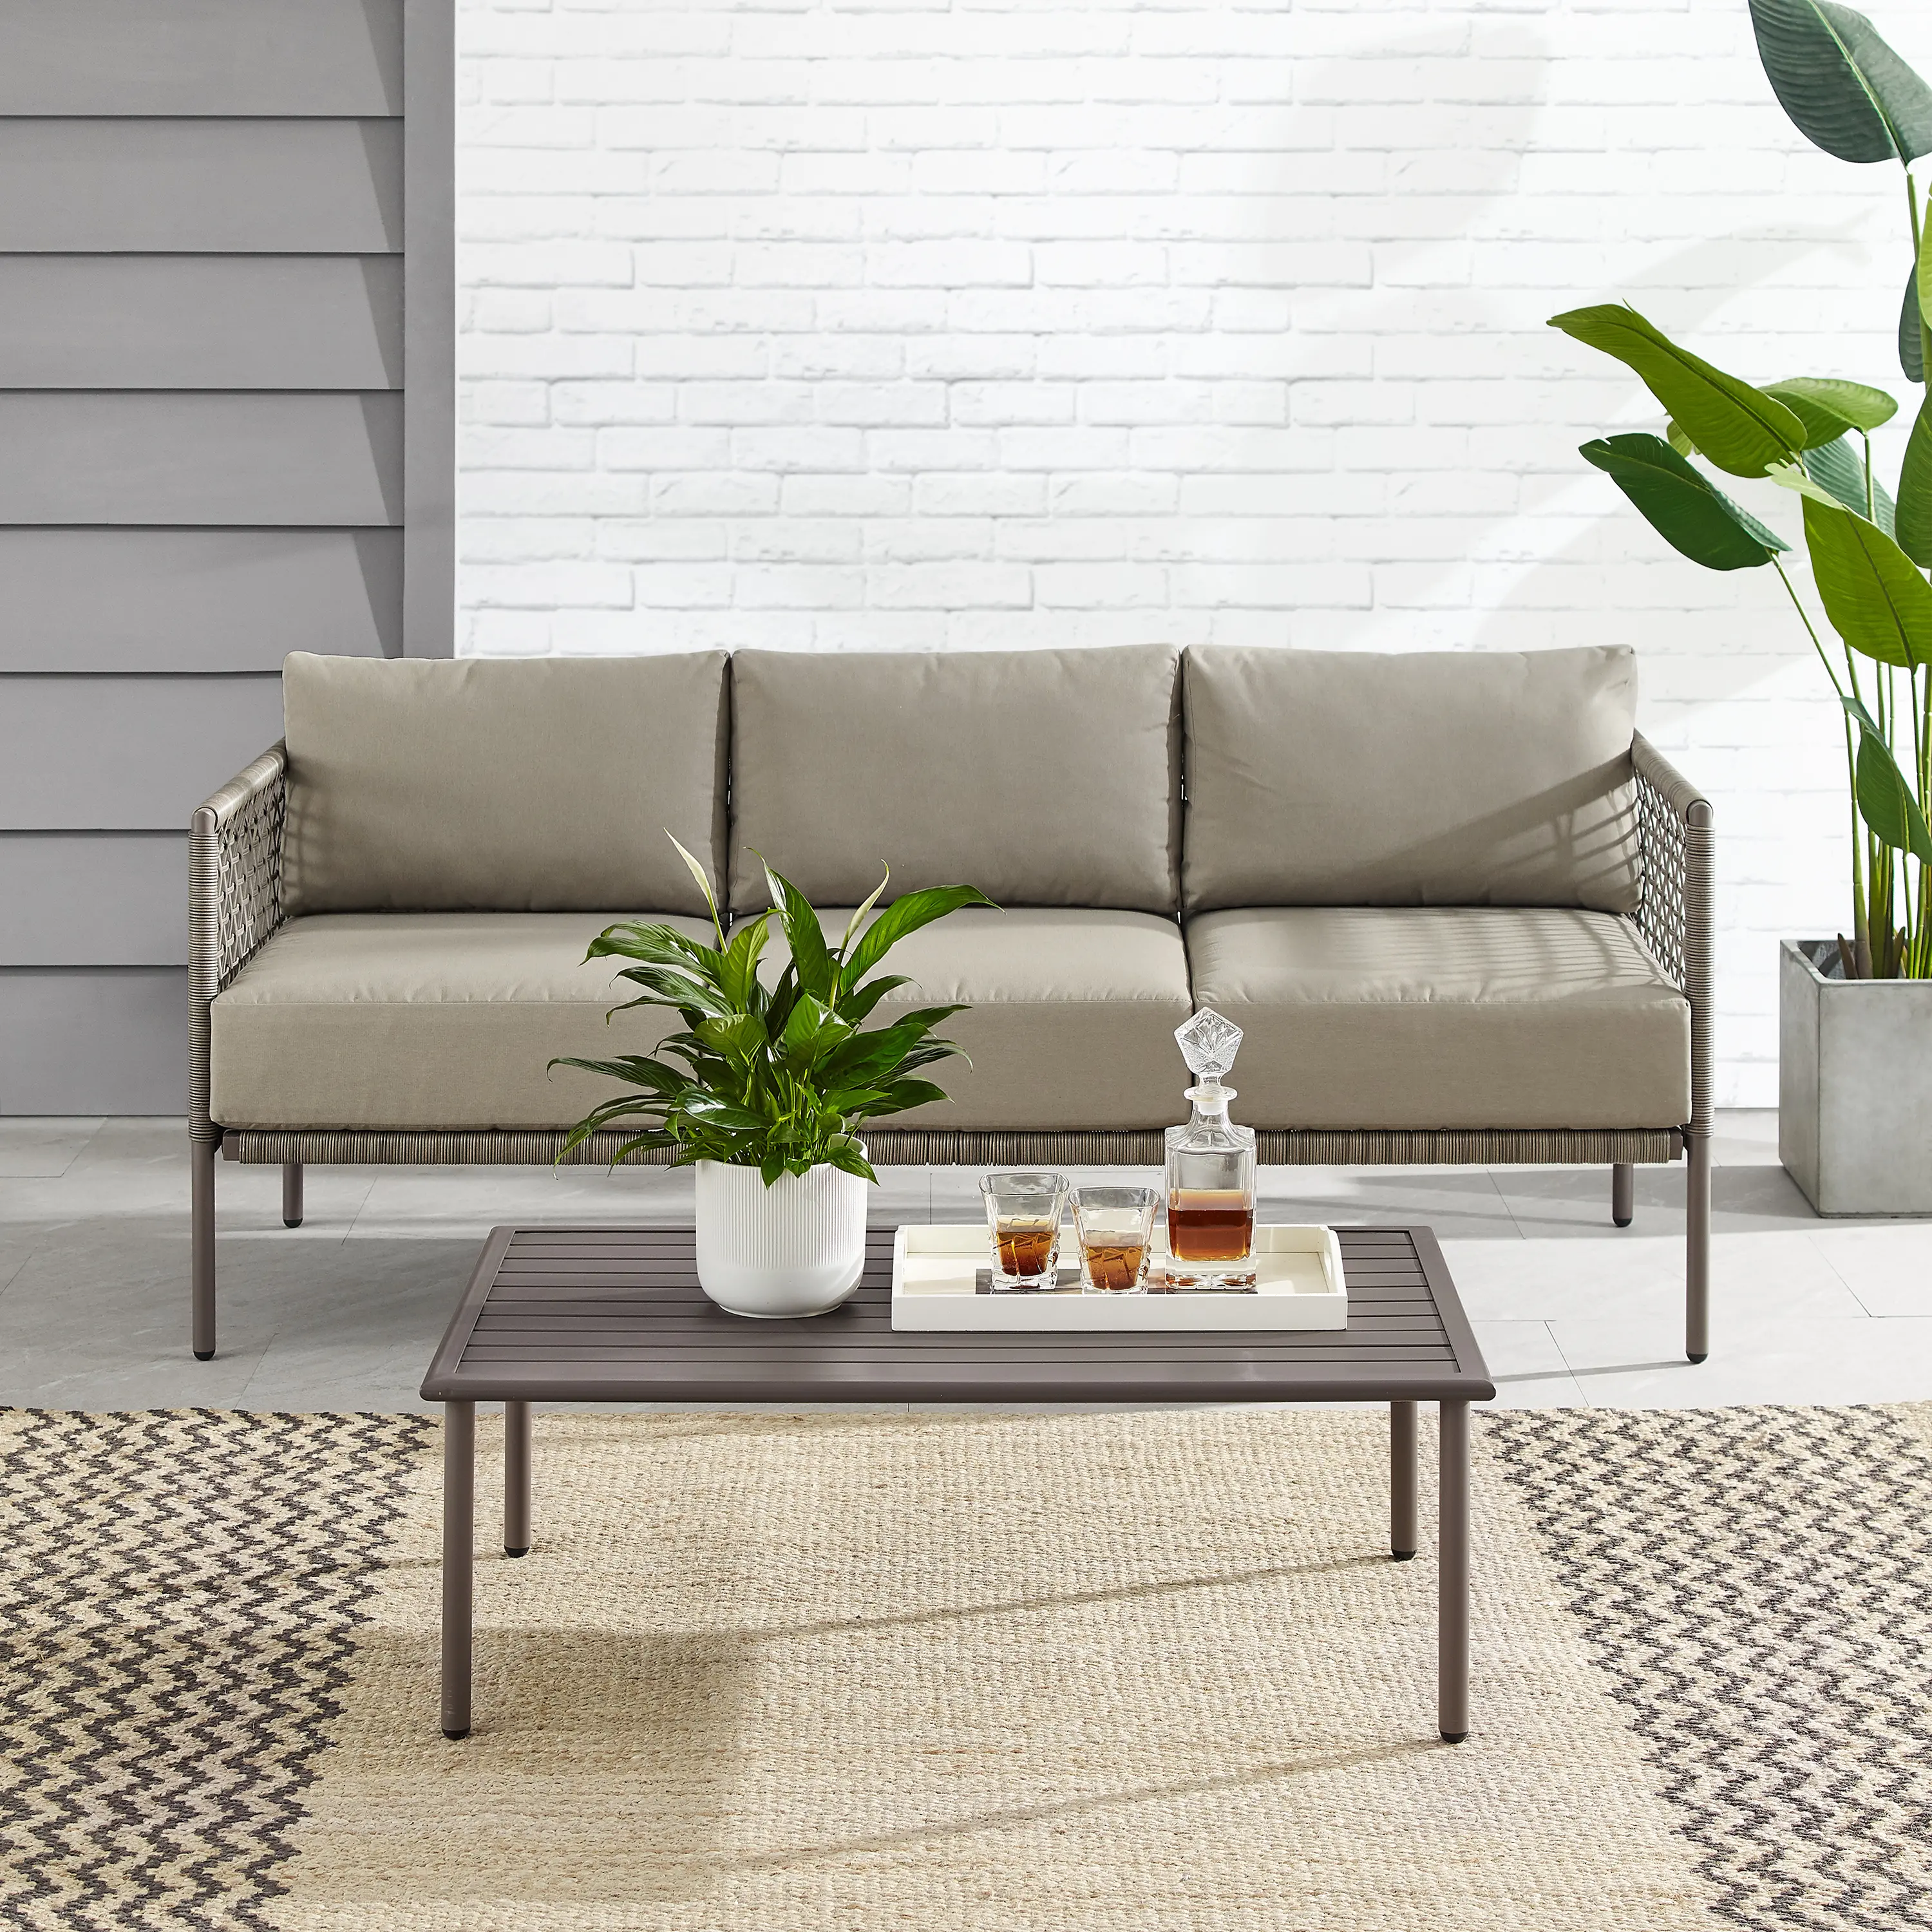 Cali Bay Taupe Wicker and Metal Sofa and Table Set